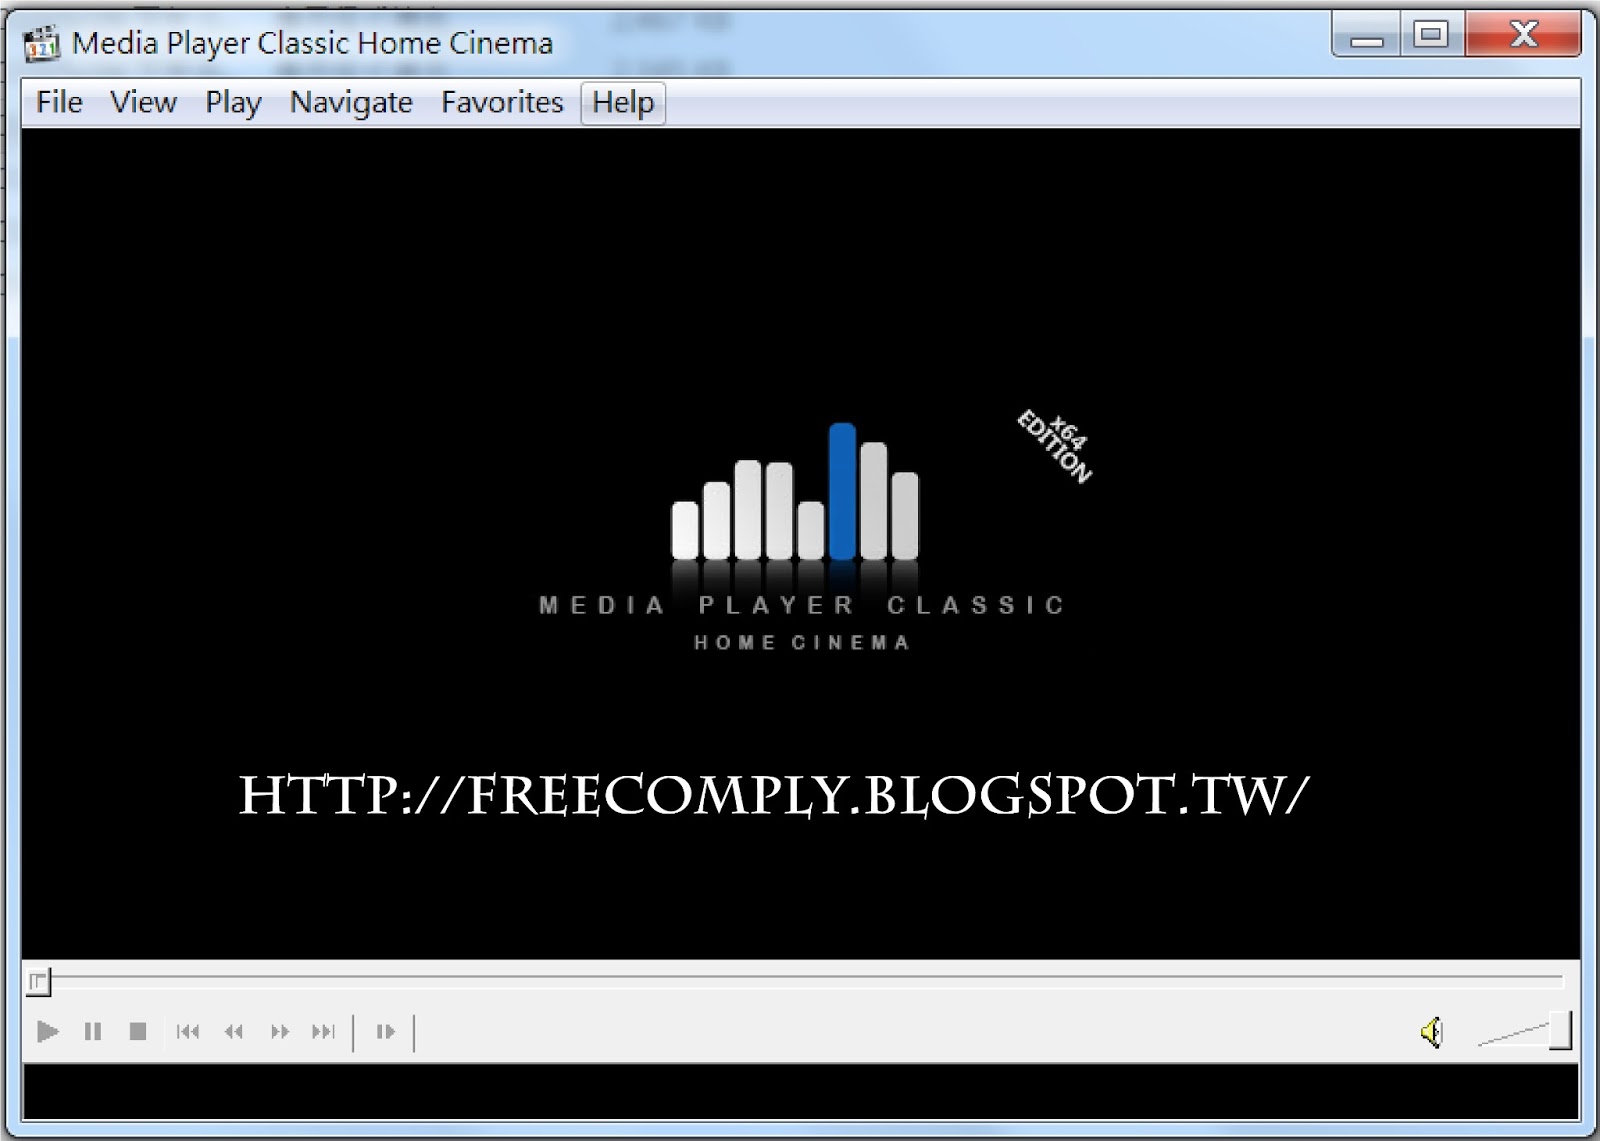 how to use media player classic home cinema